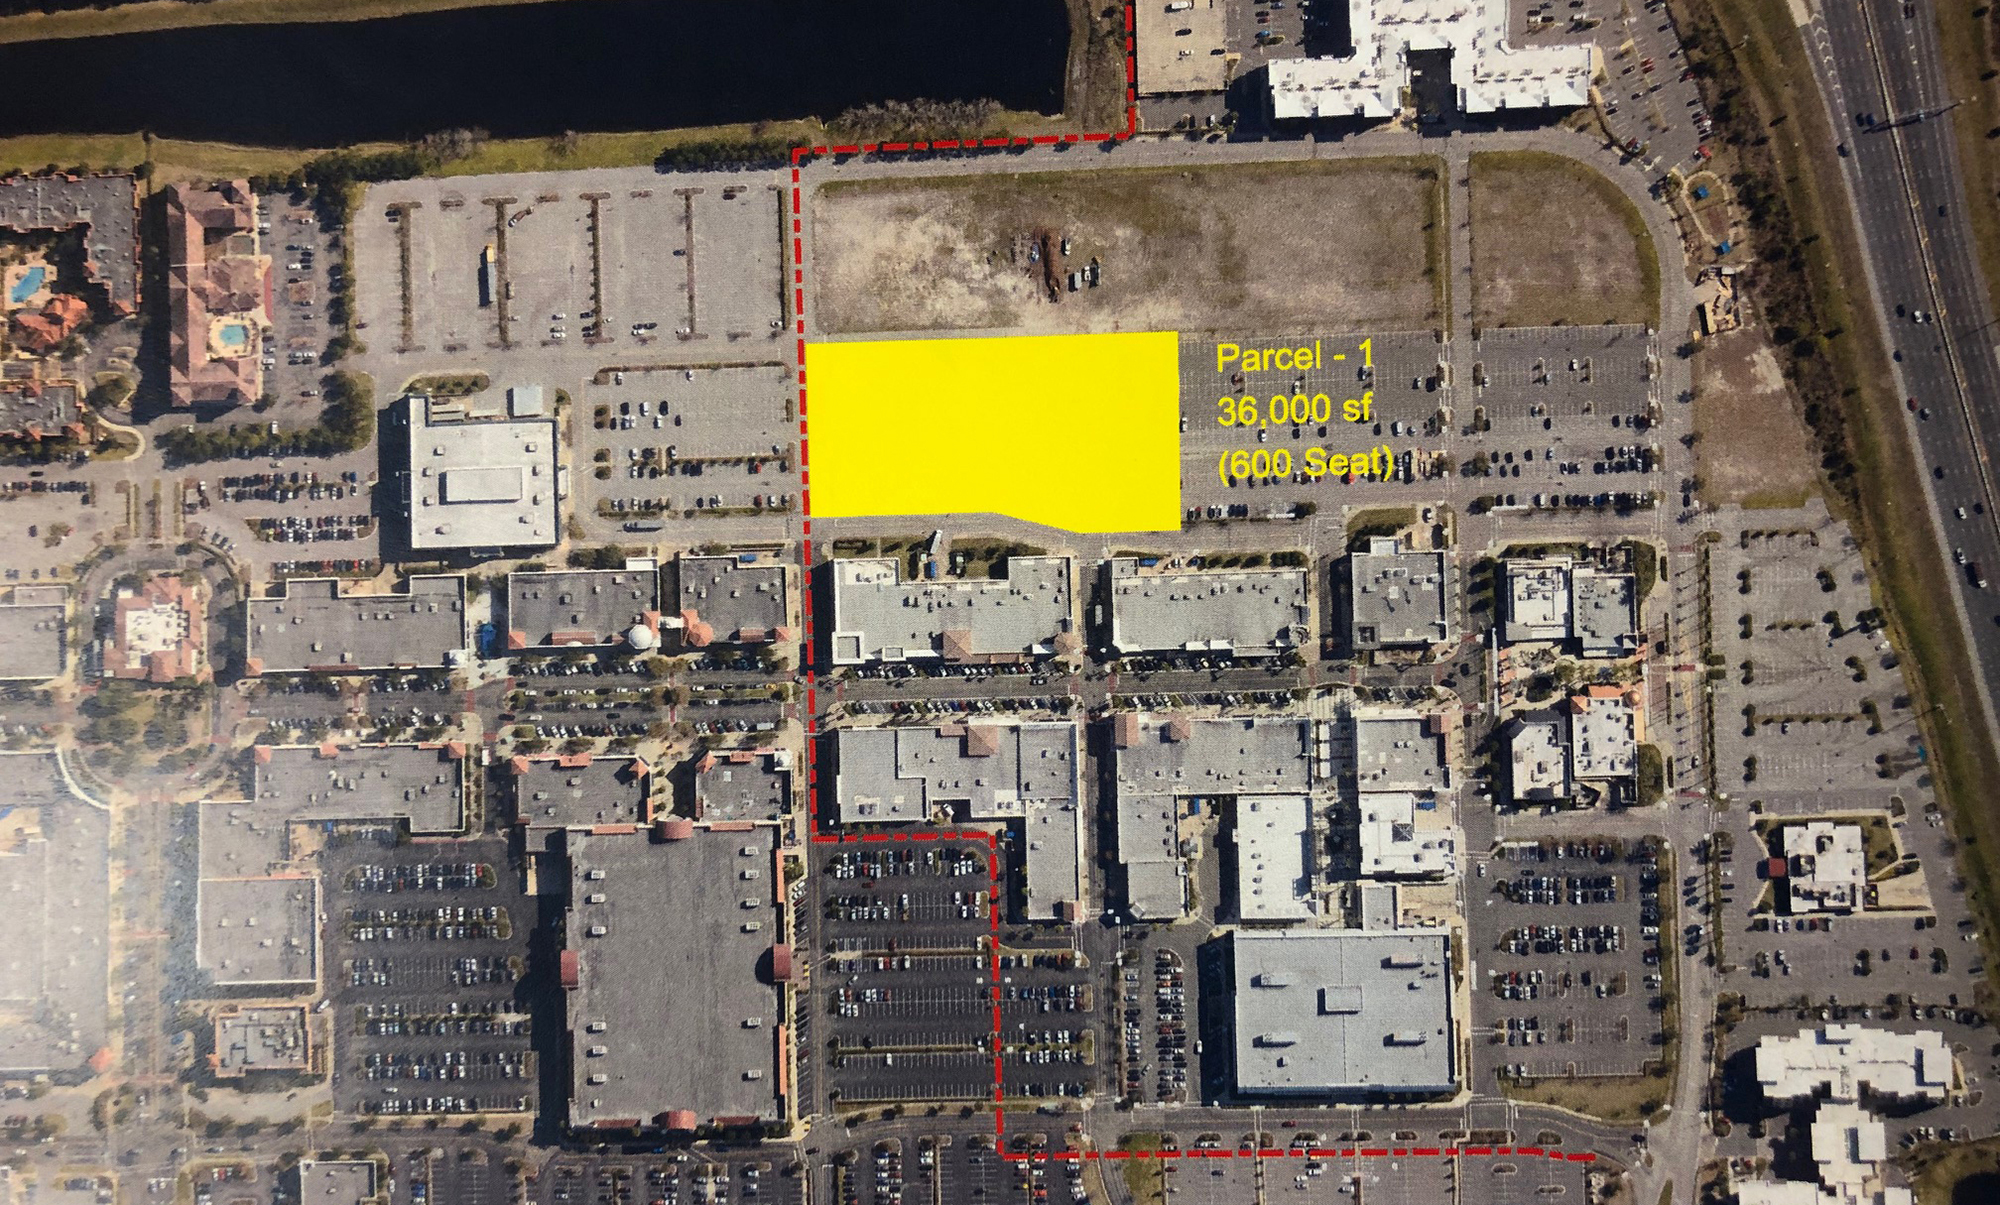 Expansion plans for St. Johns Town Center filed with the city show four parcels, one near Nordstrom and three in the southeast corner that is now a parking lot and grassy area.